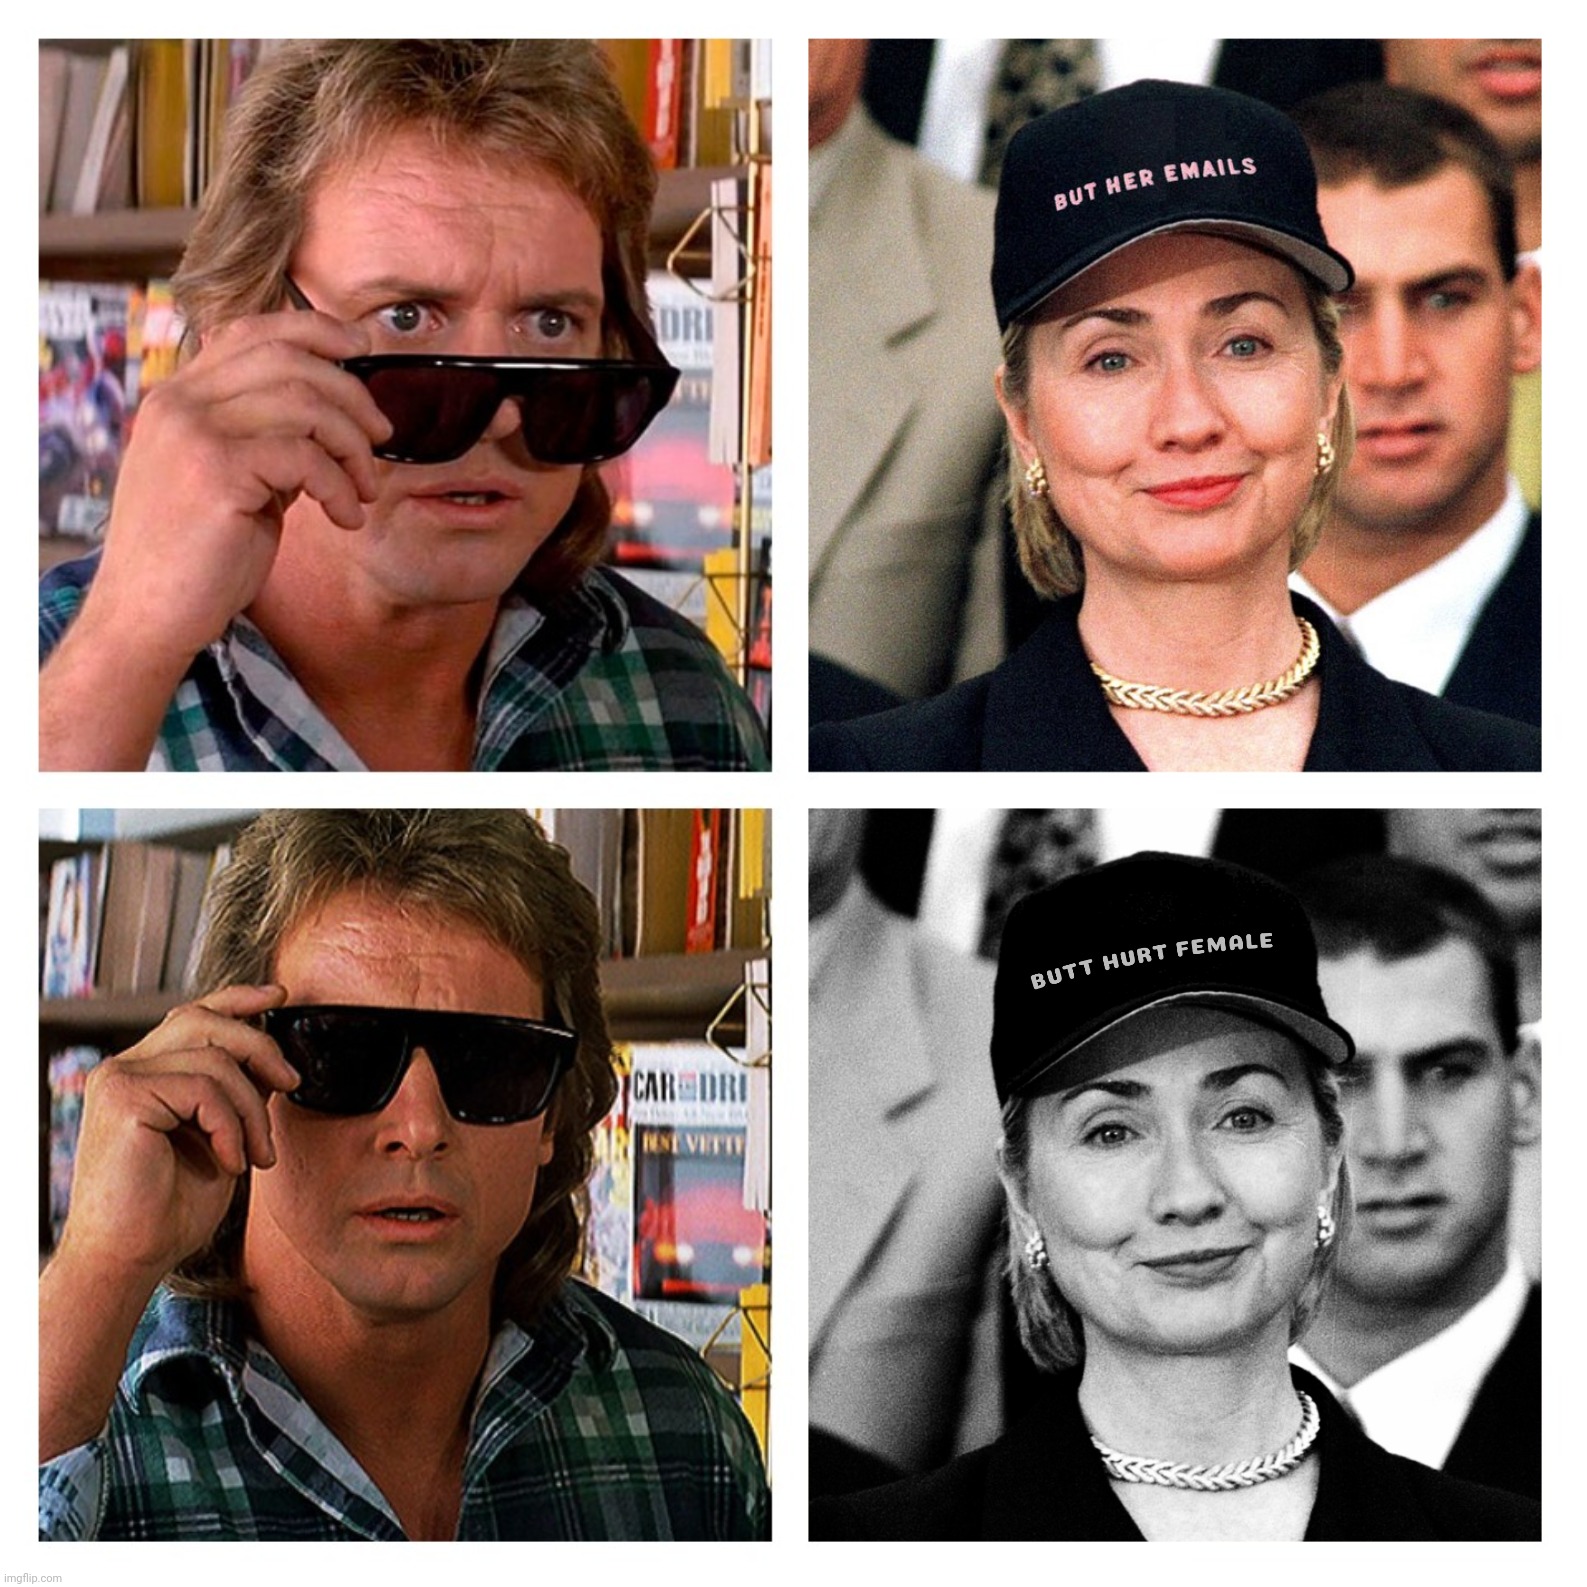 Bad Photoshop Sunday presents:  "Still crazy after all these years" | image tagged in bad photoshop sunday,hillary clinton,they live,but her emails,butt hurt female | made w/ Imgflip meme maker